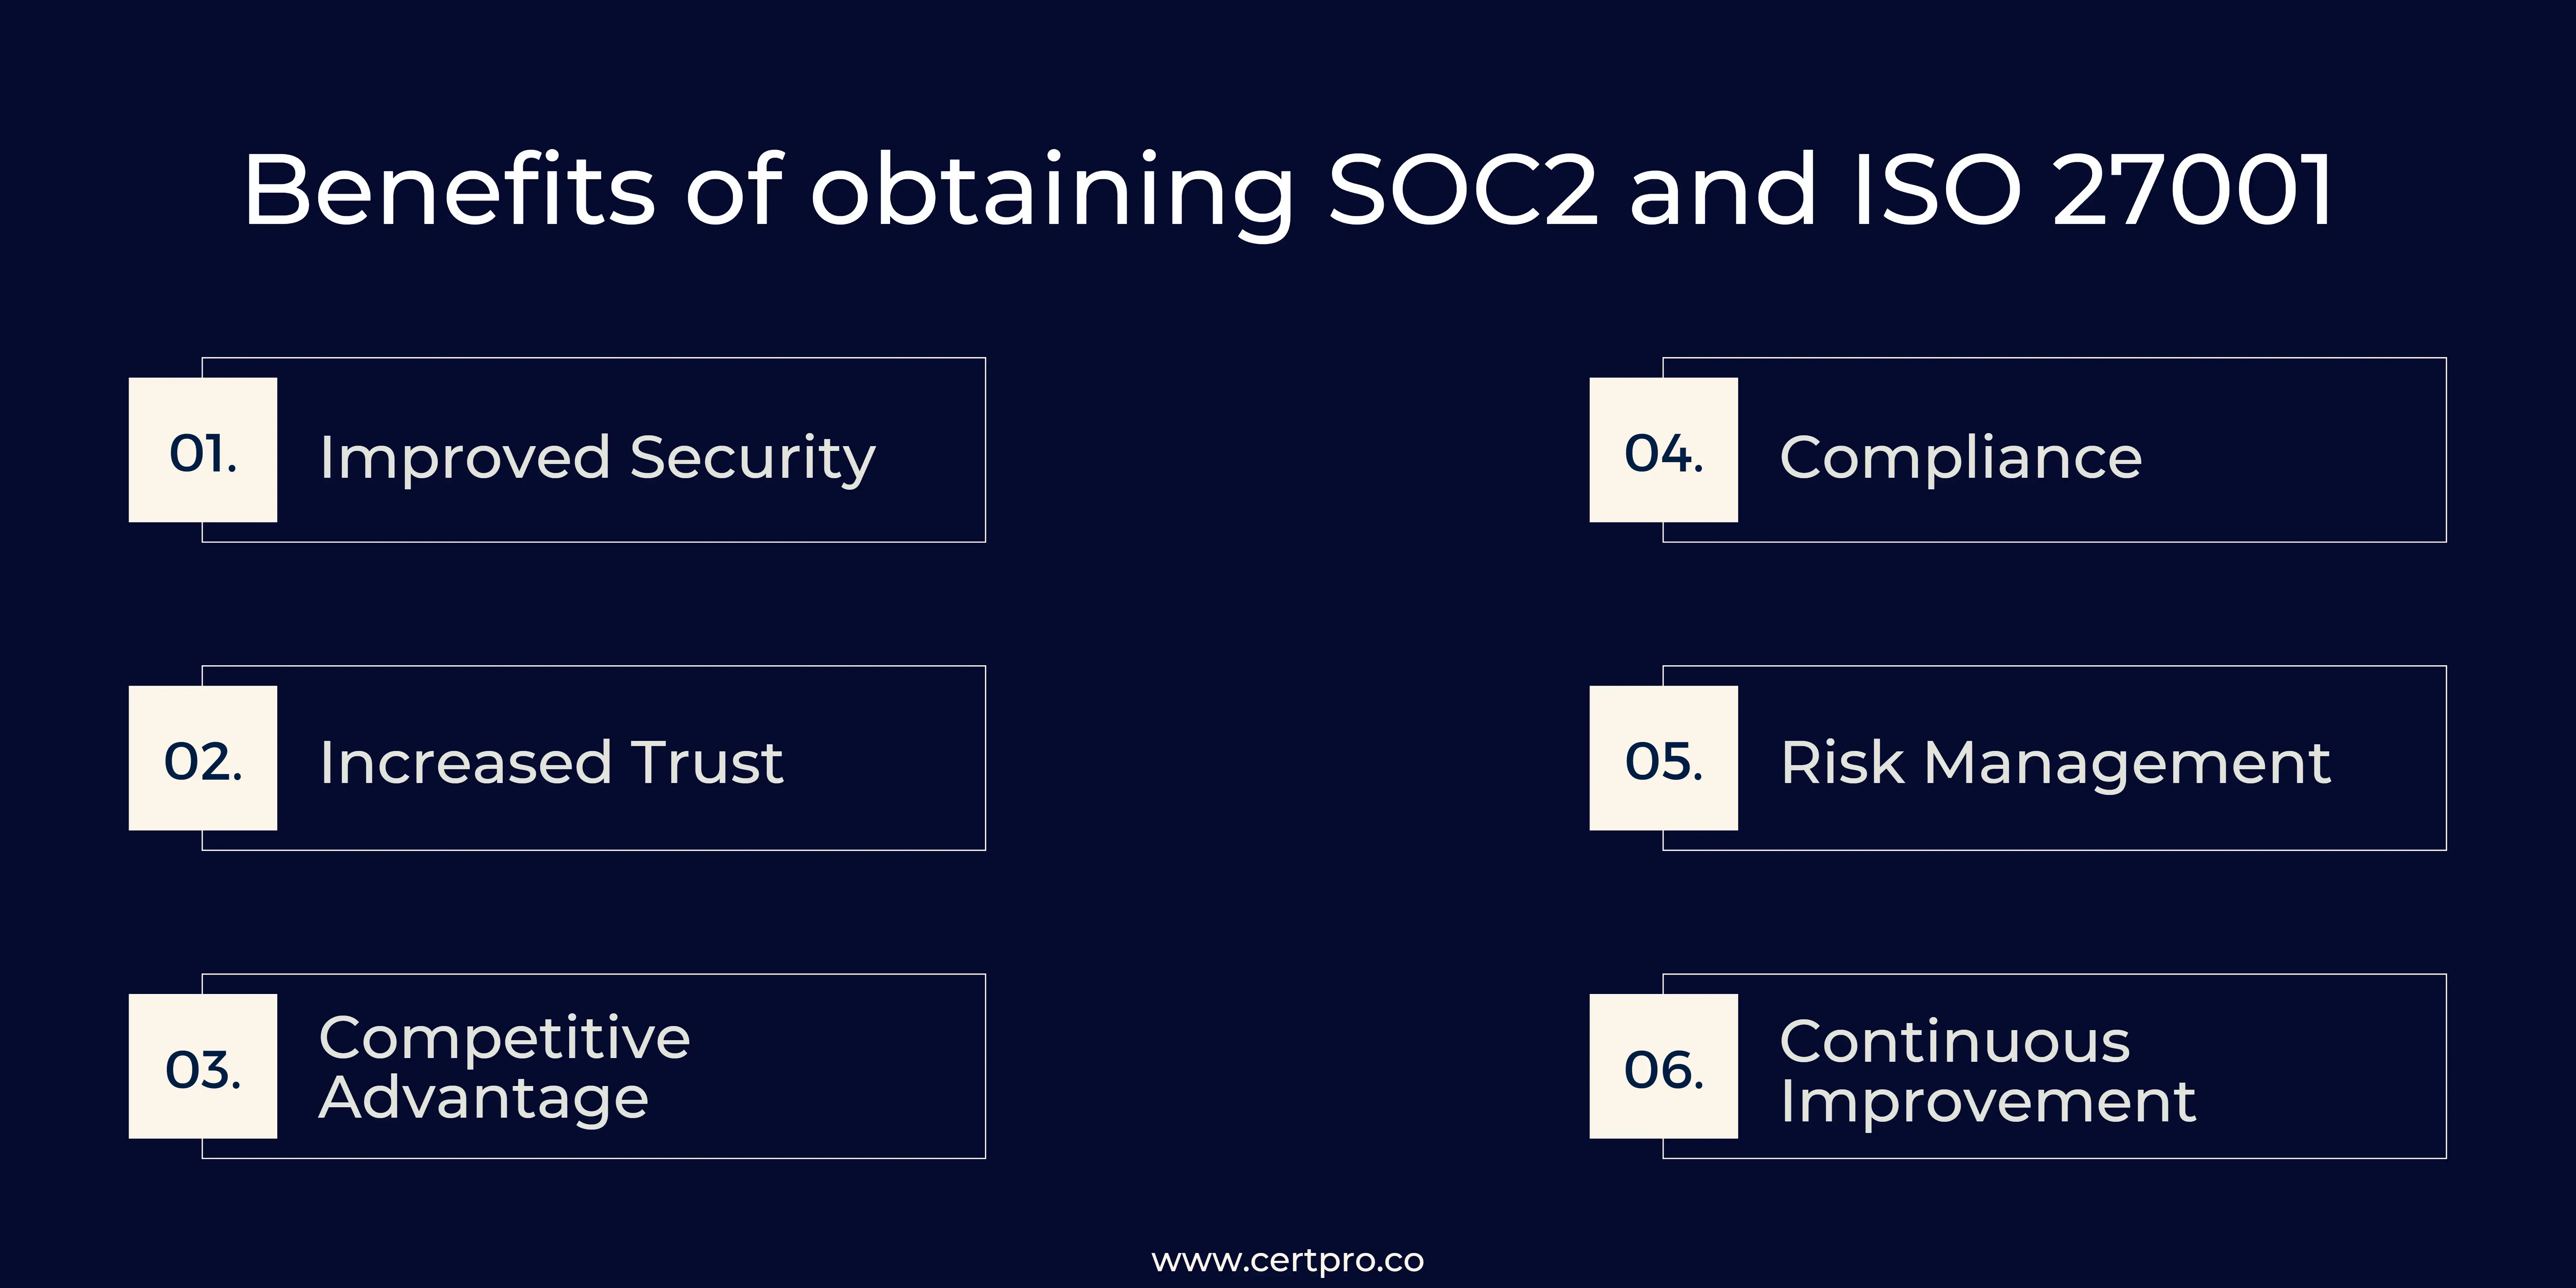 Benefits of SOC 2 and ISO 27001 Security Standards